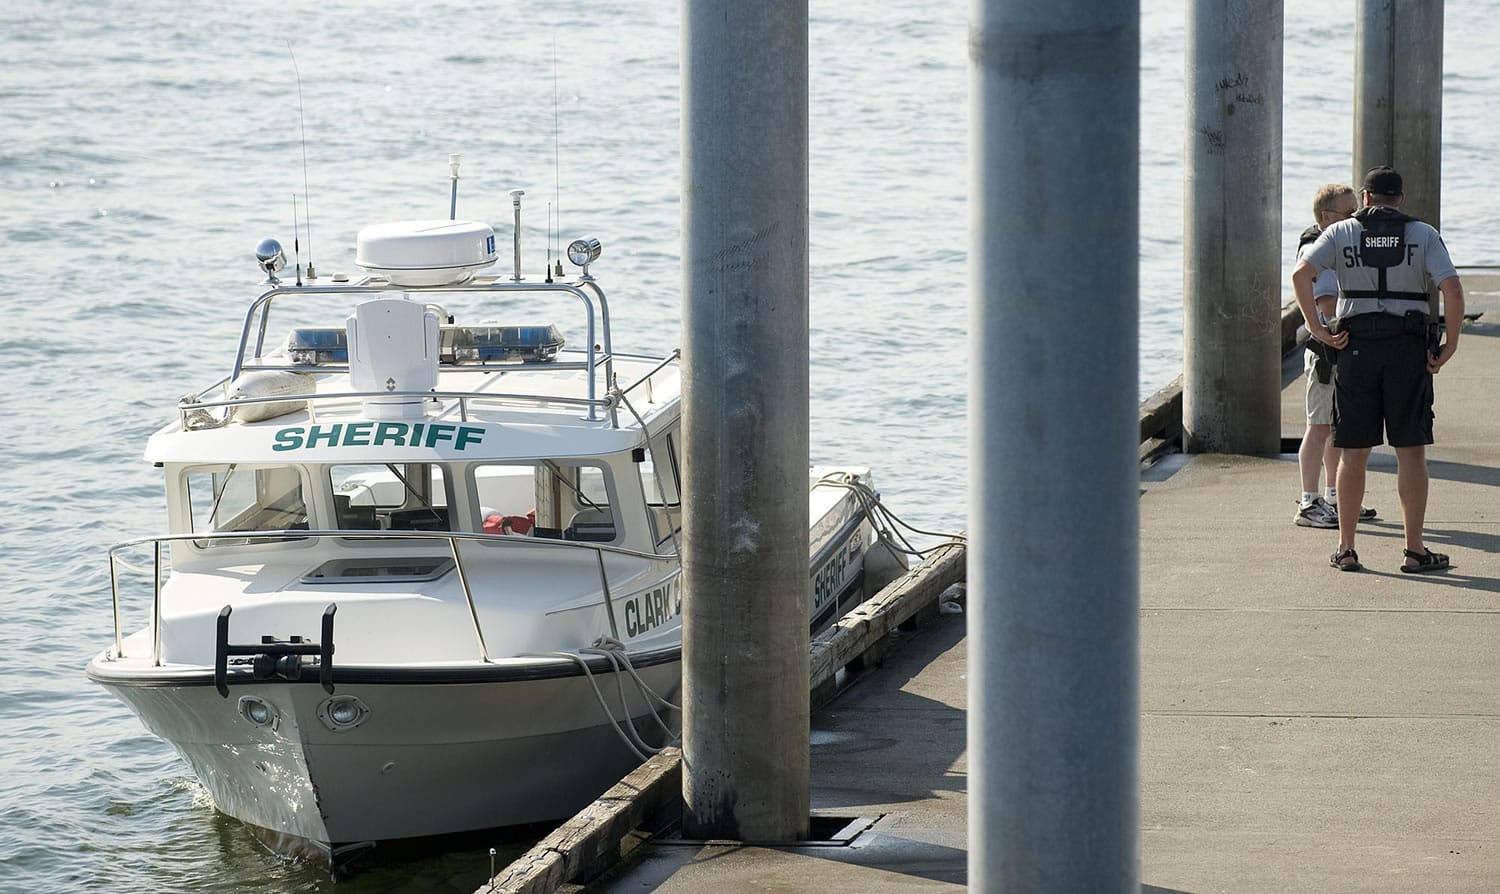 The 24-foot Sea Sport is one of several in the marine patrol fleet.